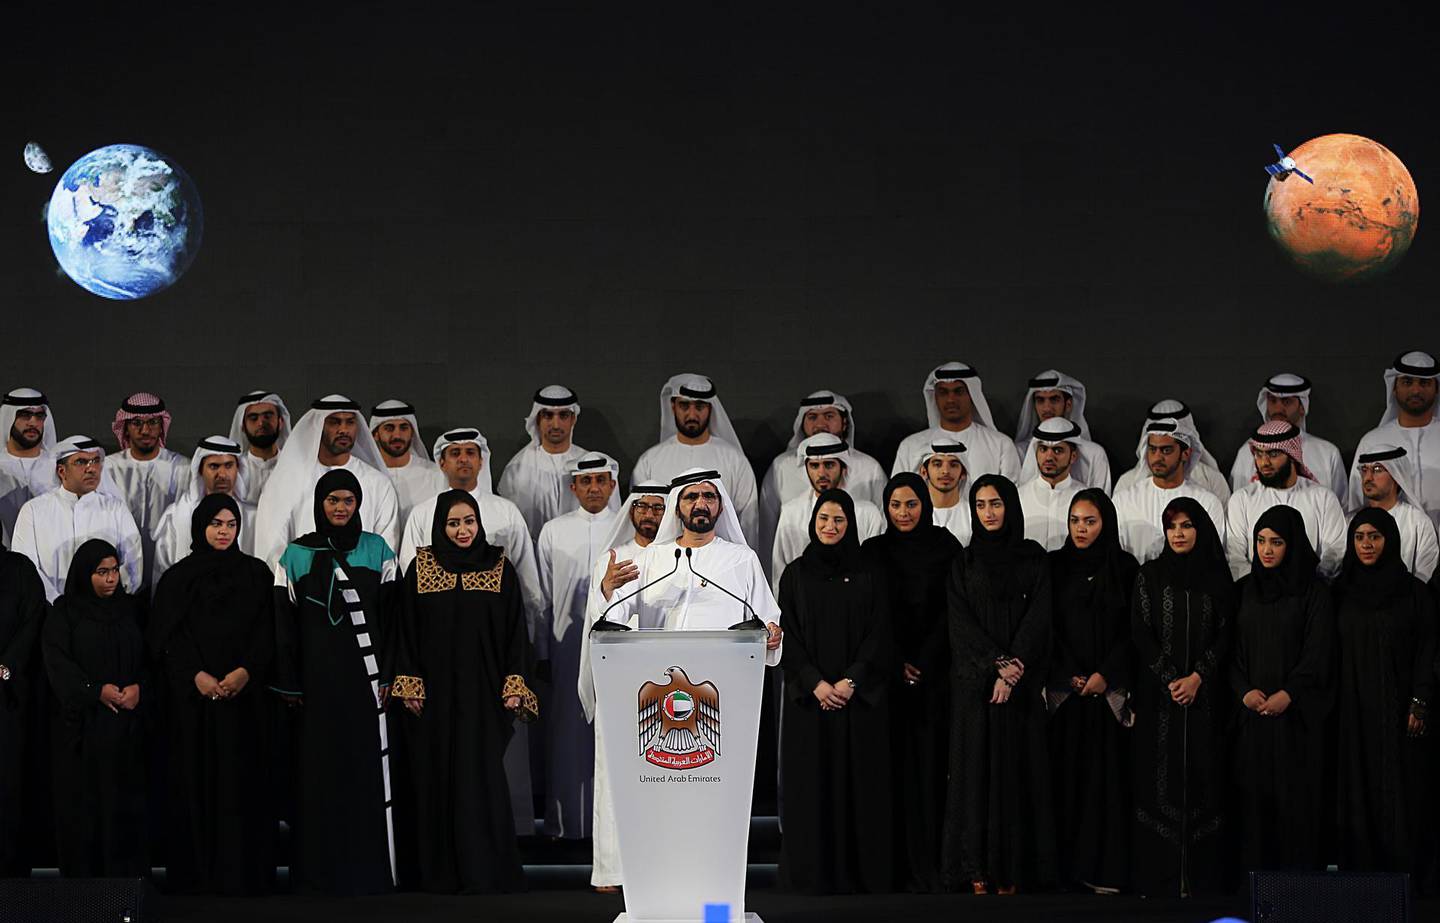 Dubai ruler Sheikh Mohammed bin Rashid Al Maktoum, center, announces a United Arab Emirates' Mars mission named "Hope" ��� or "al-Amal" in Arabic ��� which is scheduled be launched in 2020, during a ceremony in Dubai, UAE, Wednesday, May 6, 2015. It would be the Arab world's first space probe to Mars and will take seven to nine months to reach the red planet, arriving in 2021. Emirati scientists hope the unmanned probe will provide a deeper understanding of the Martian atmosphere, and expect it to remain in orbit until at least 2023. (AP Photo/Kamran Jebreili)